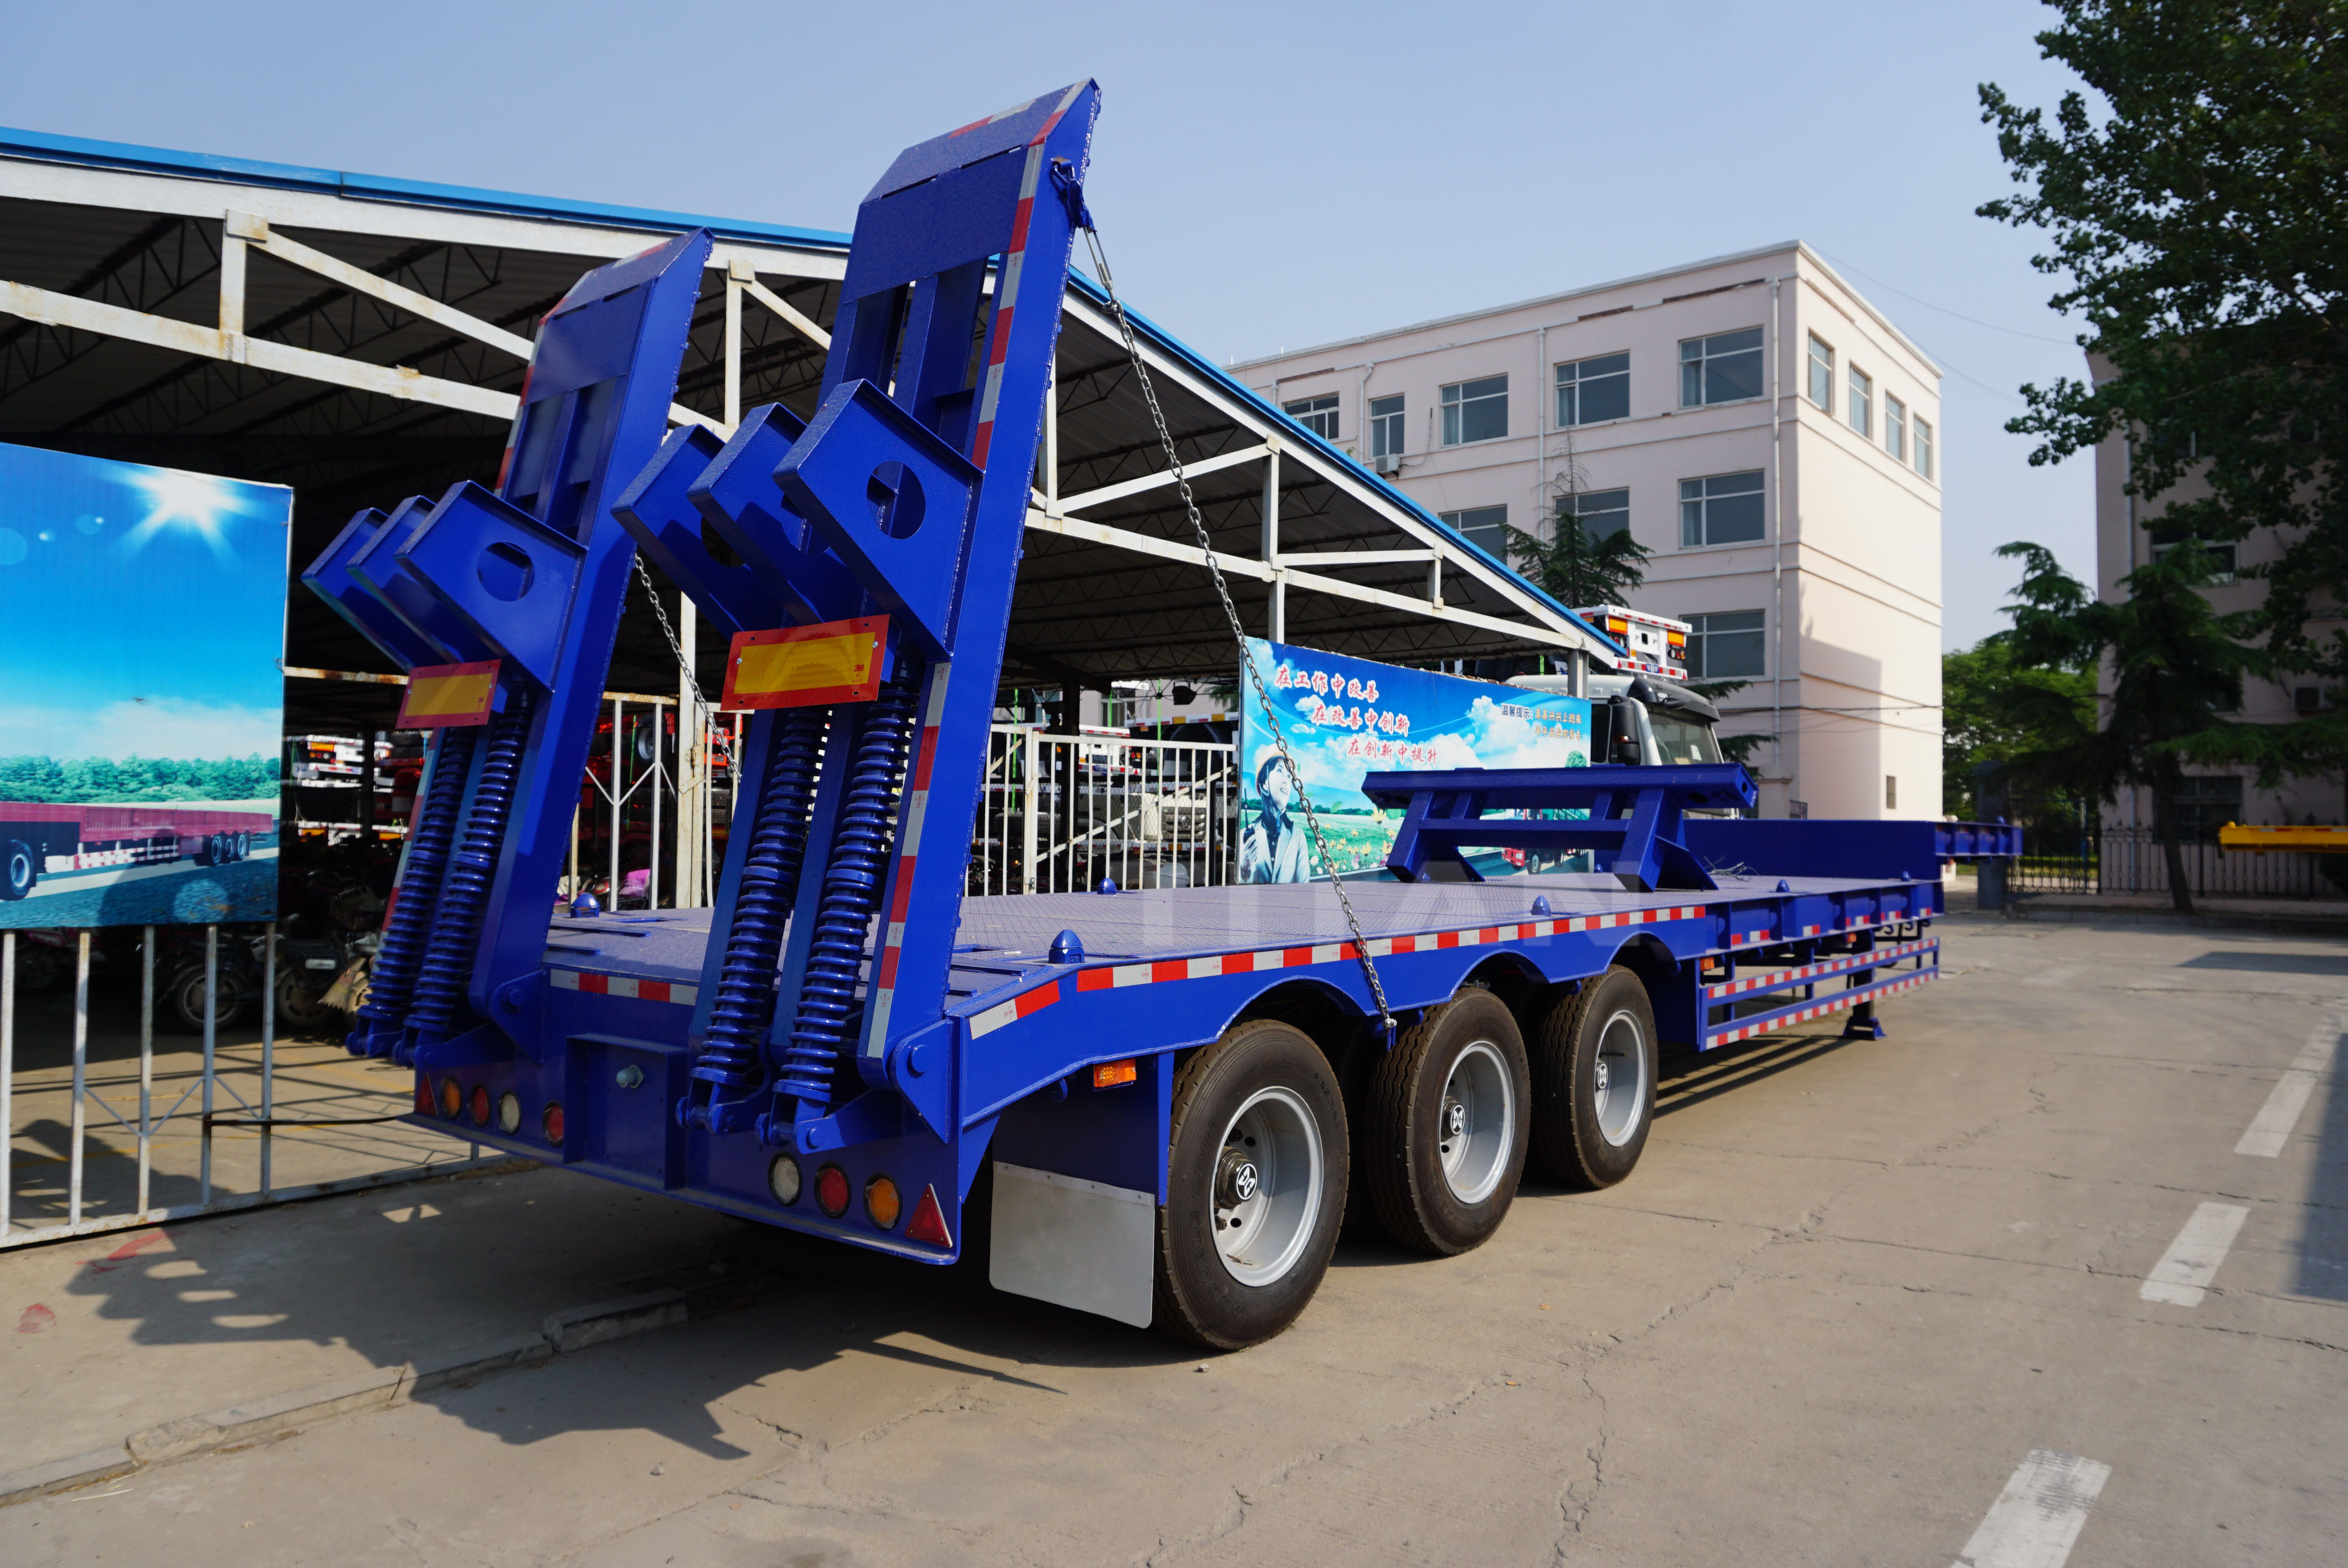 TITAN production low loader with excavator recess is a famous brand and is safe and durable.